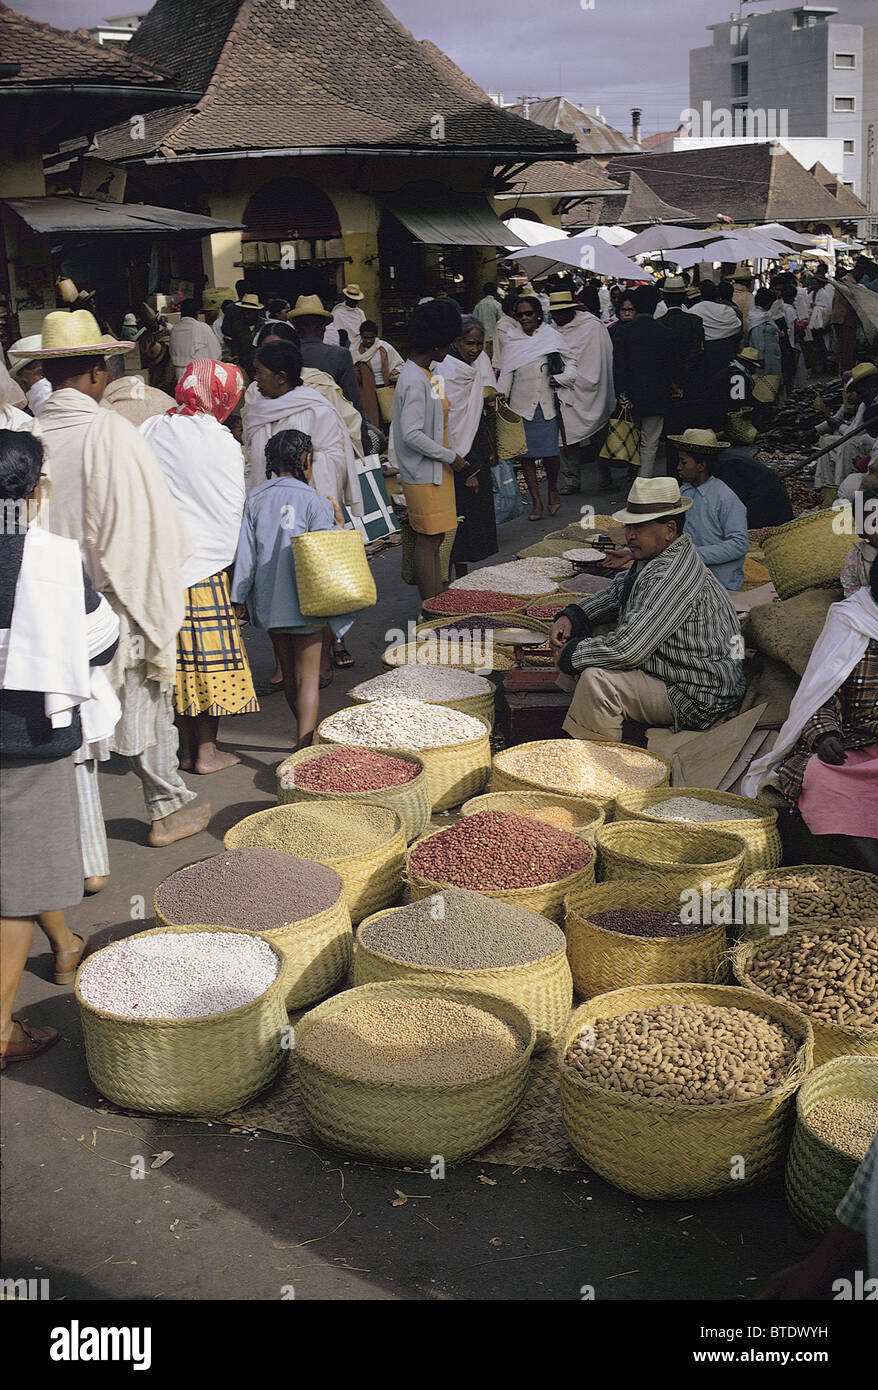 https://c8.alamy.com/comp/BTDWYH/vendor-with-baskets-of-dried-goods-for-sale-at-the-market-in-antananarivo-BTDWYH.jpg